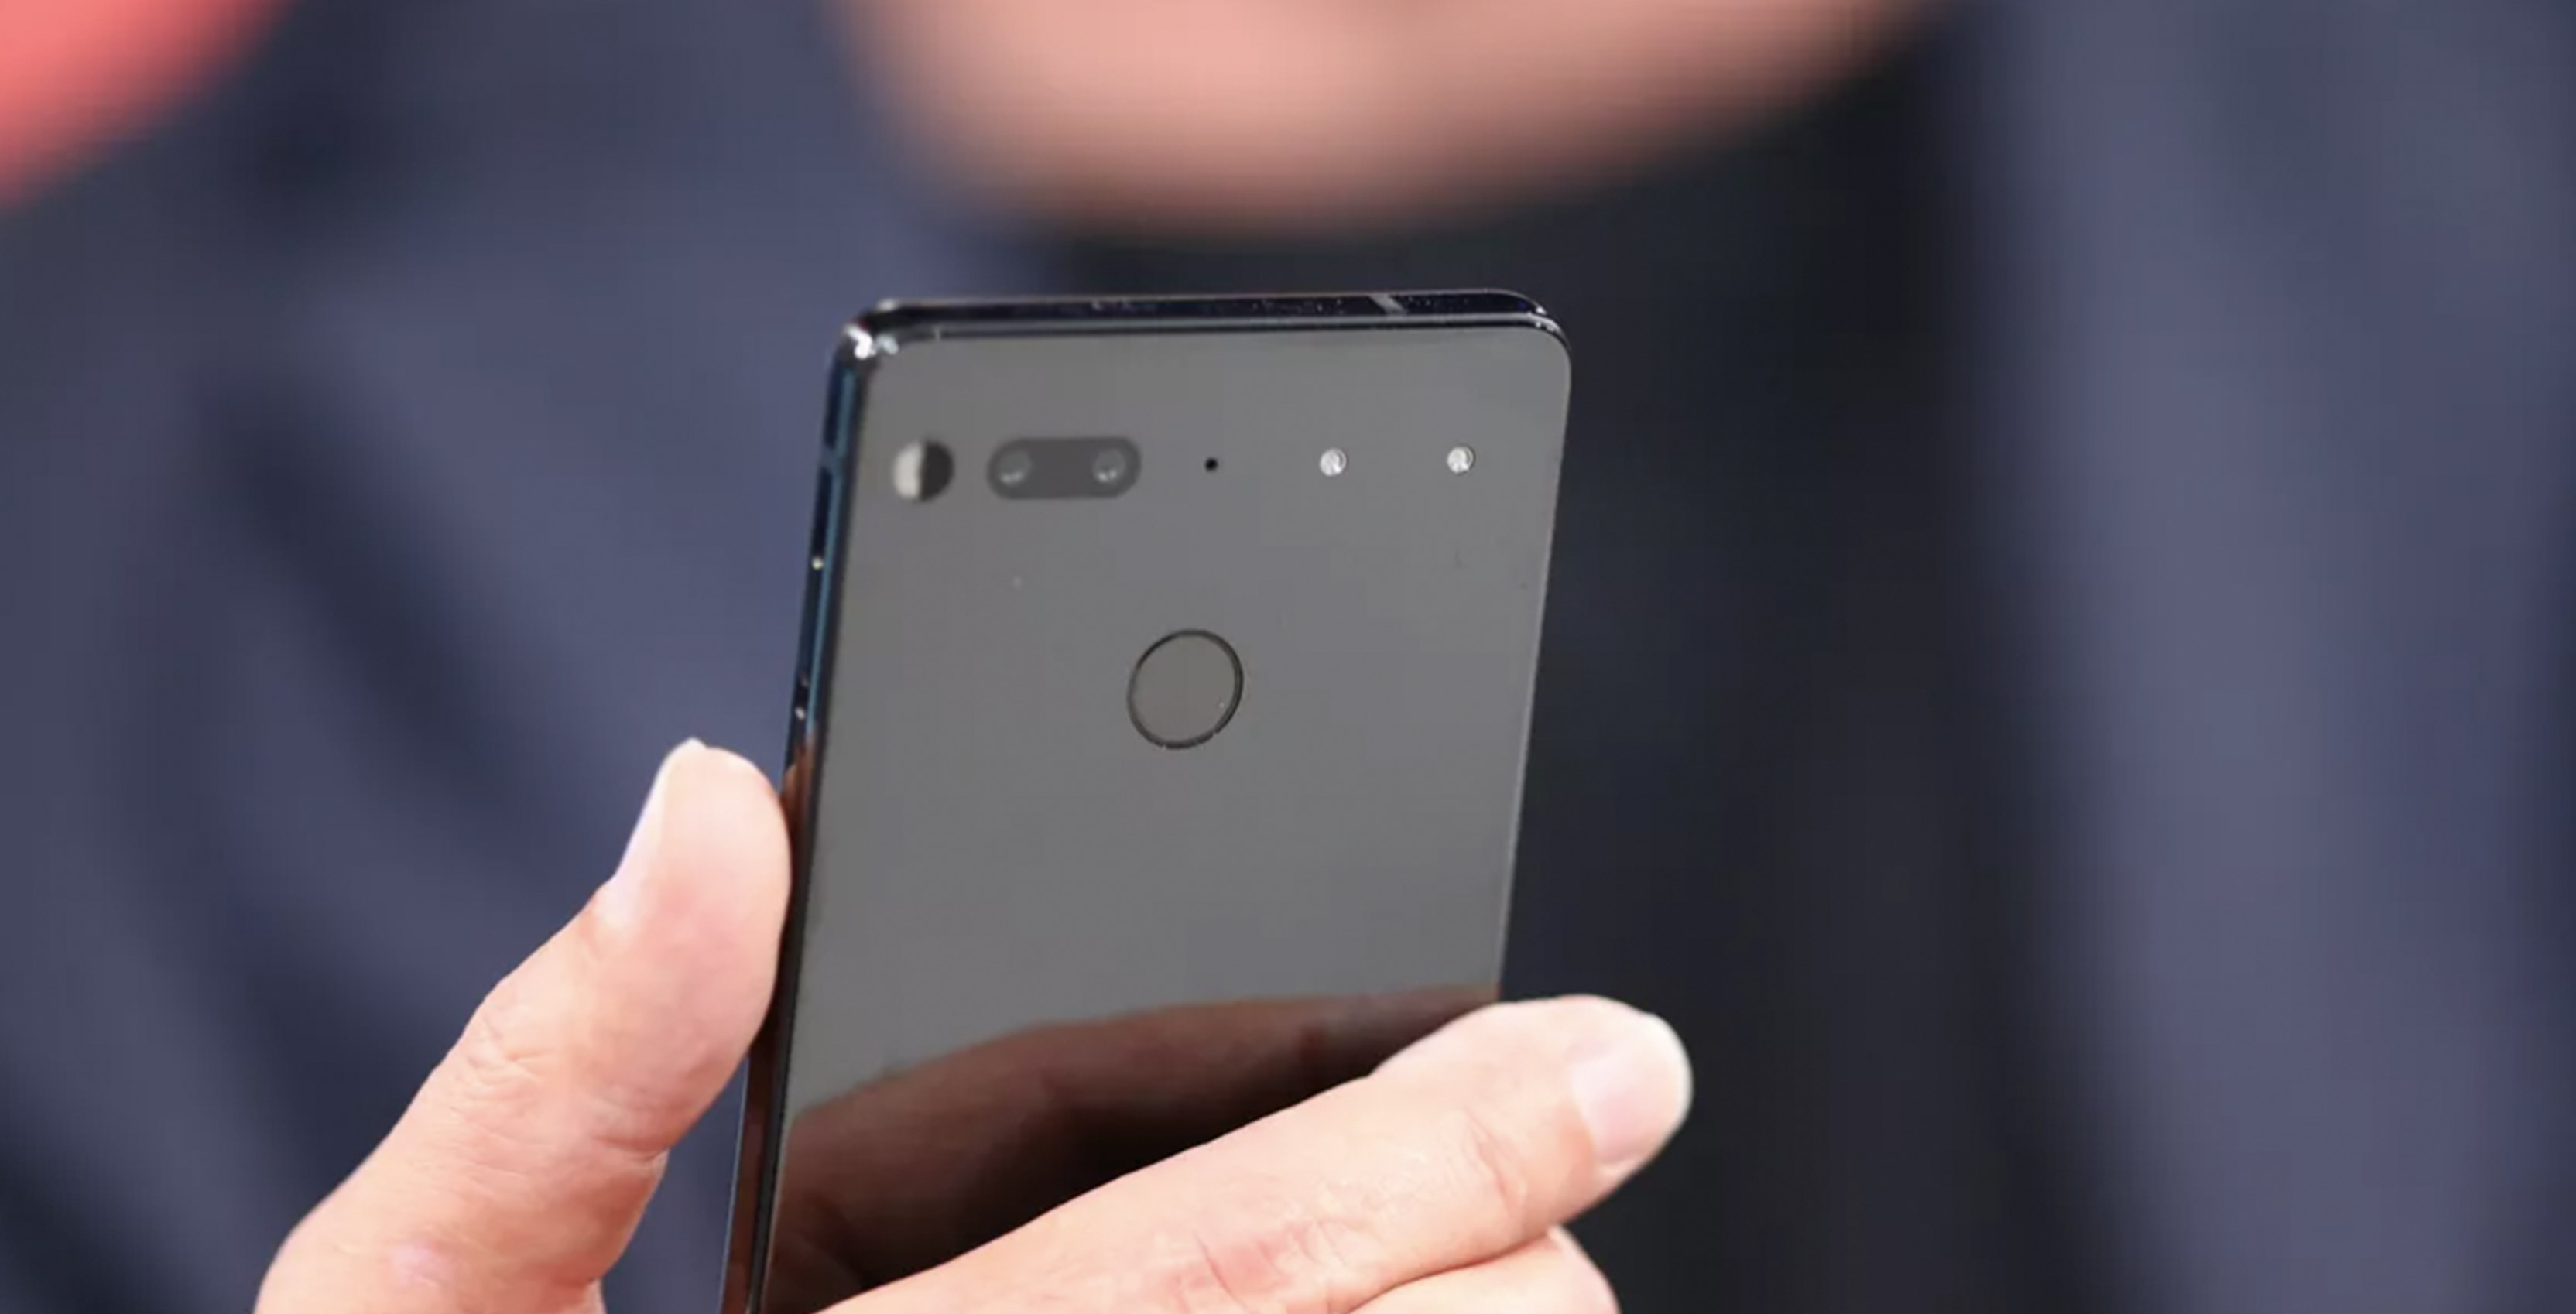 Essential phone in hand